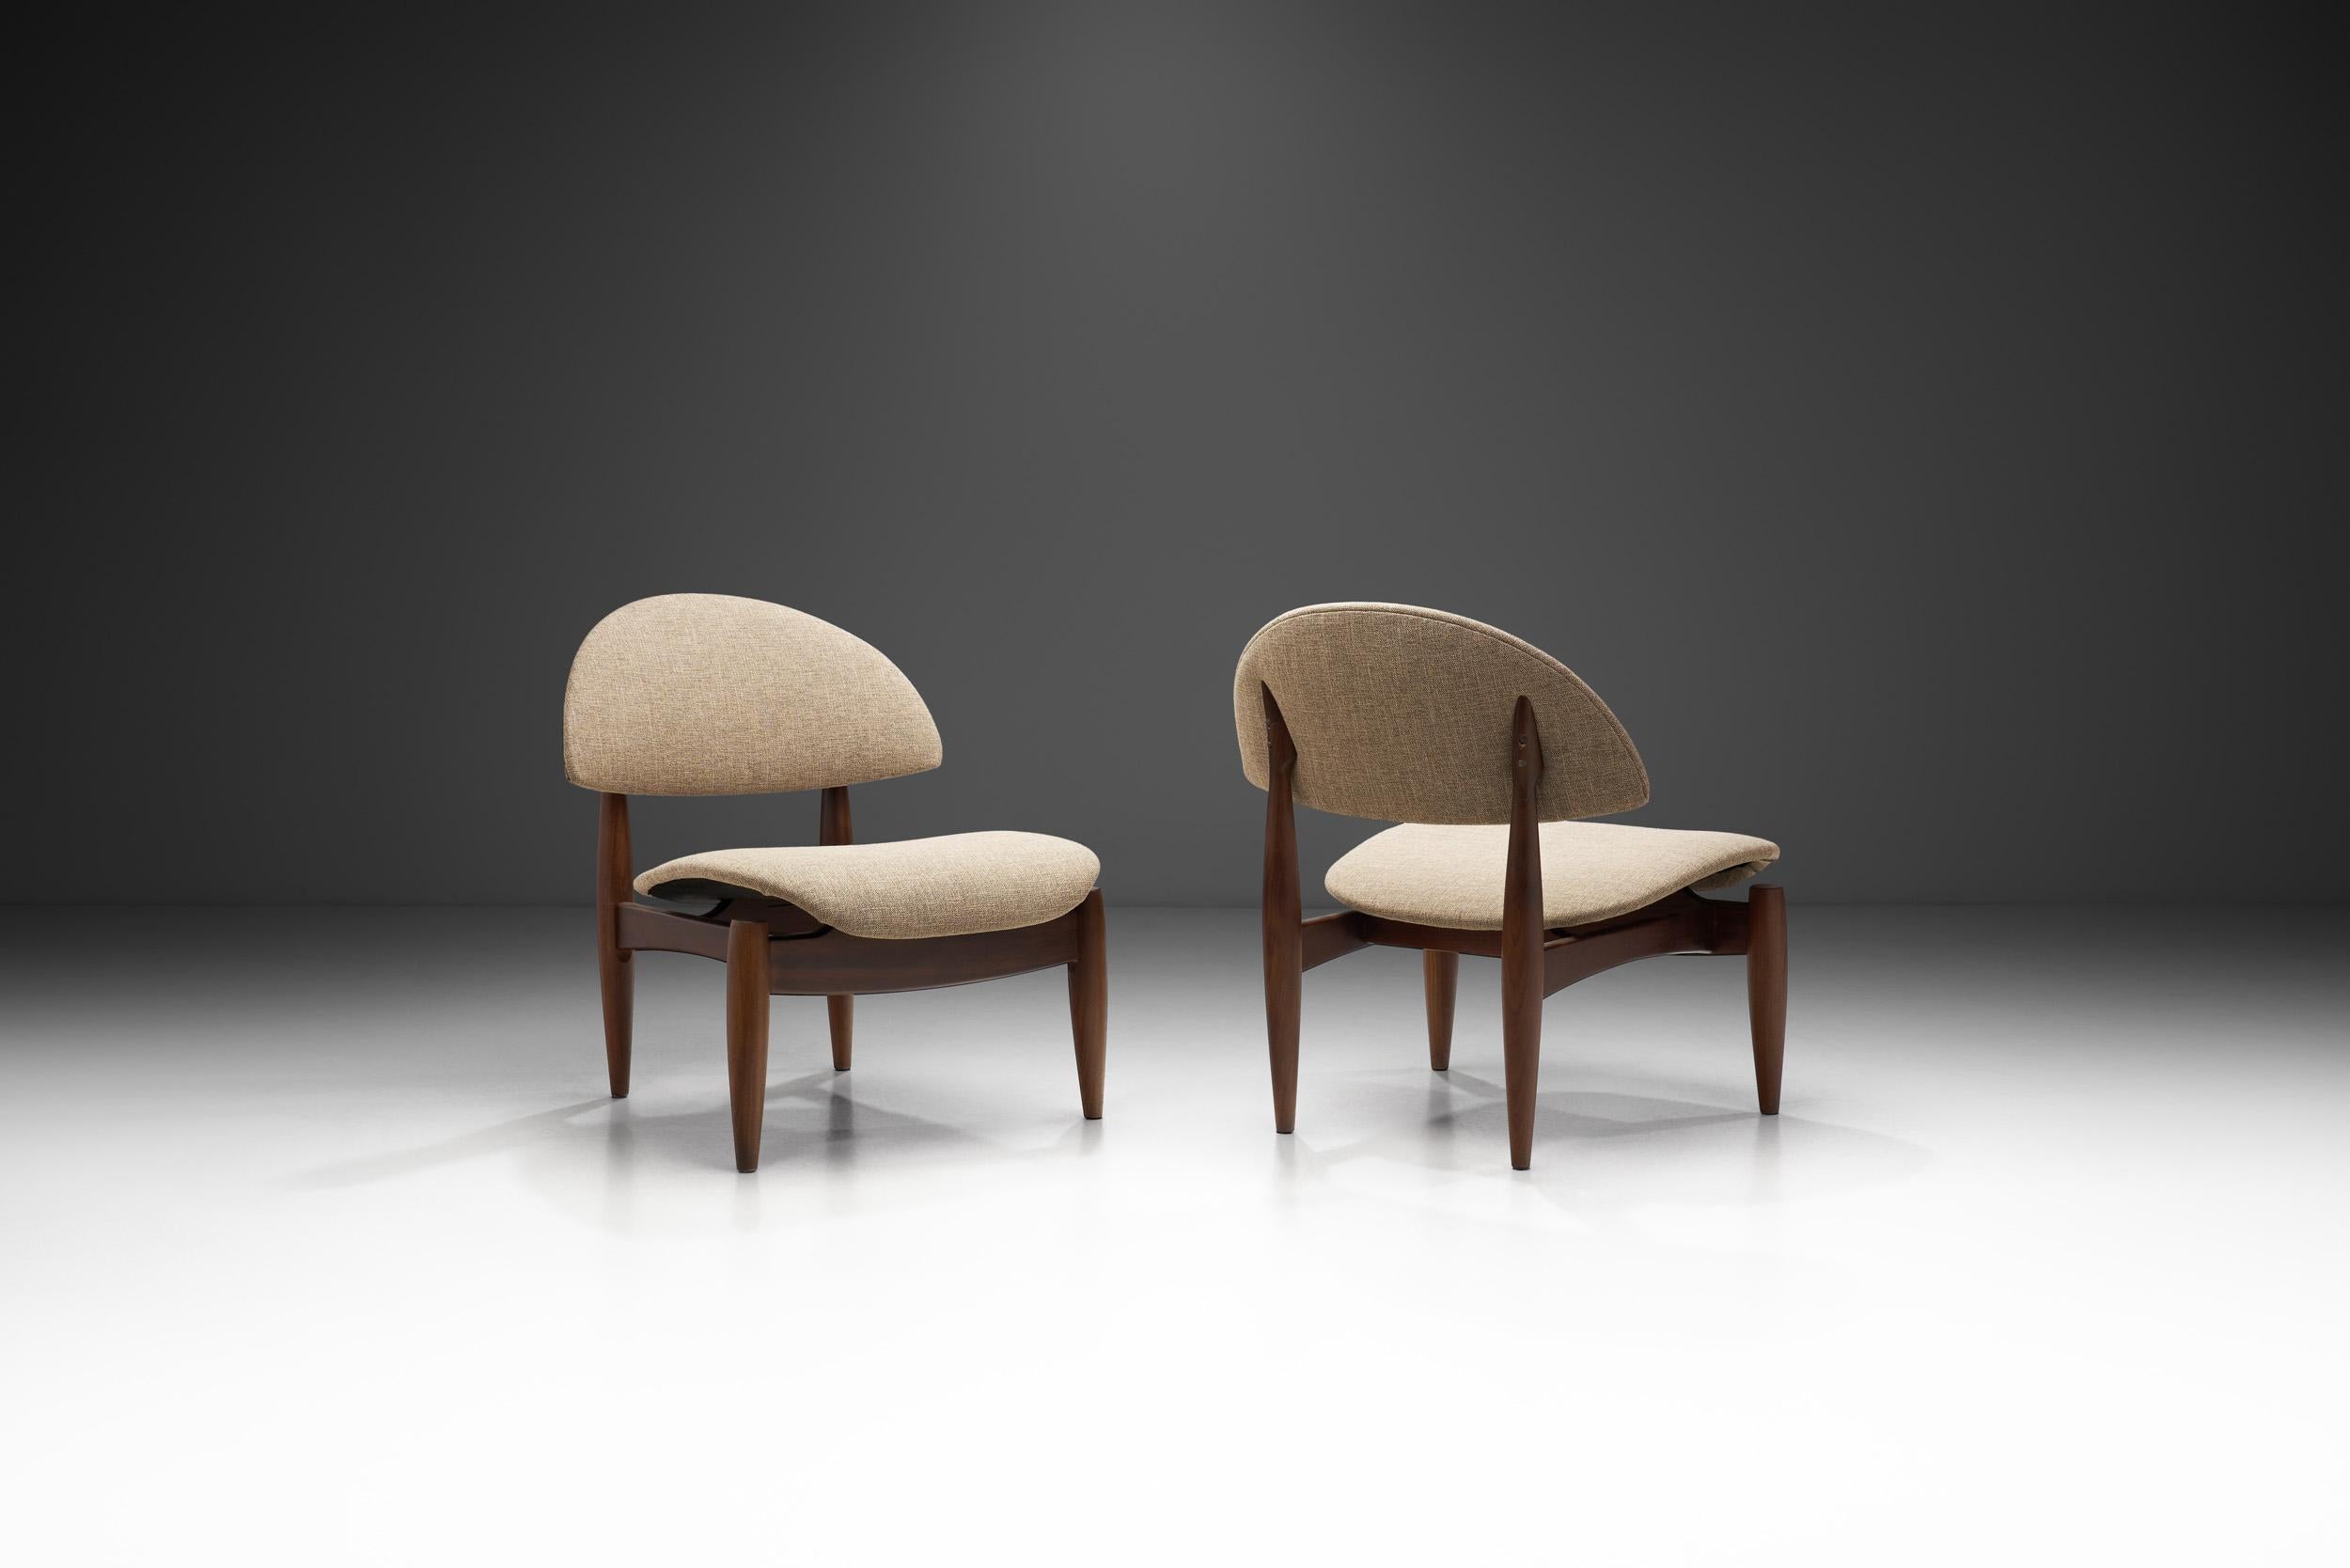 These artistic chairs have a sculptural look that is often refereed to as an “oyster”. From Finn Juhl’s “France chair” to Seymour “James” Weiner’s “Oyster” chair, this style has been popular since the mid-century era. This pair offers an interesting